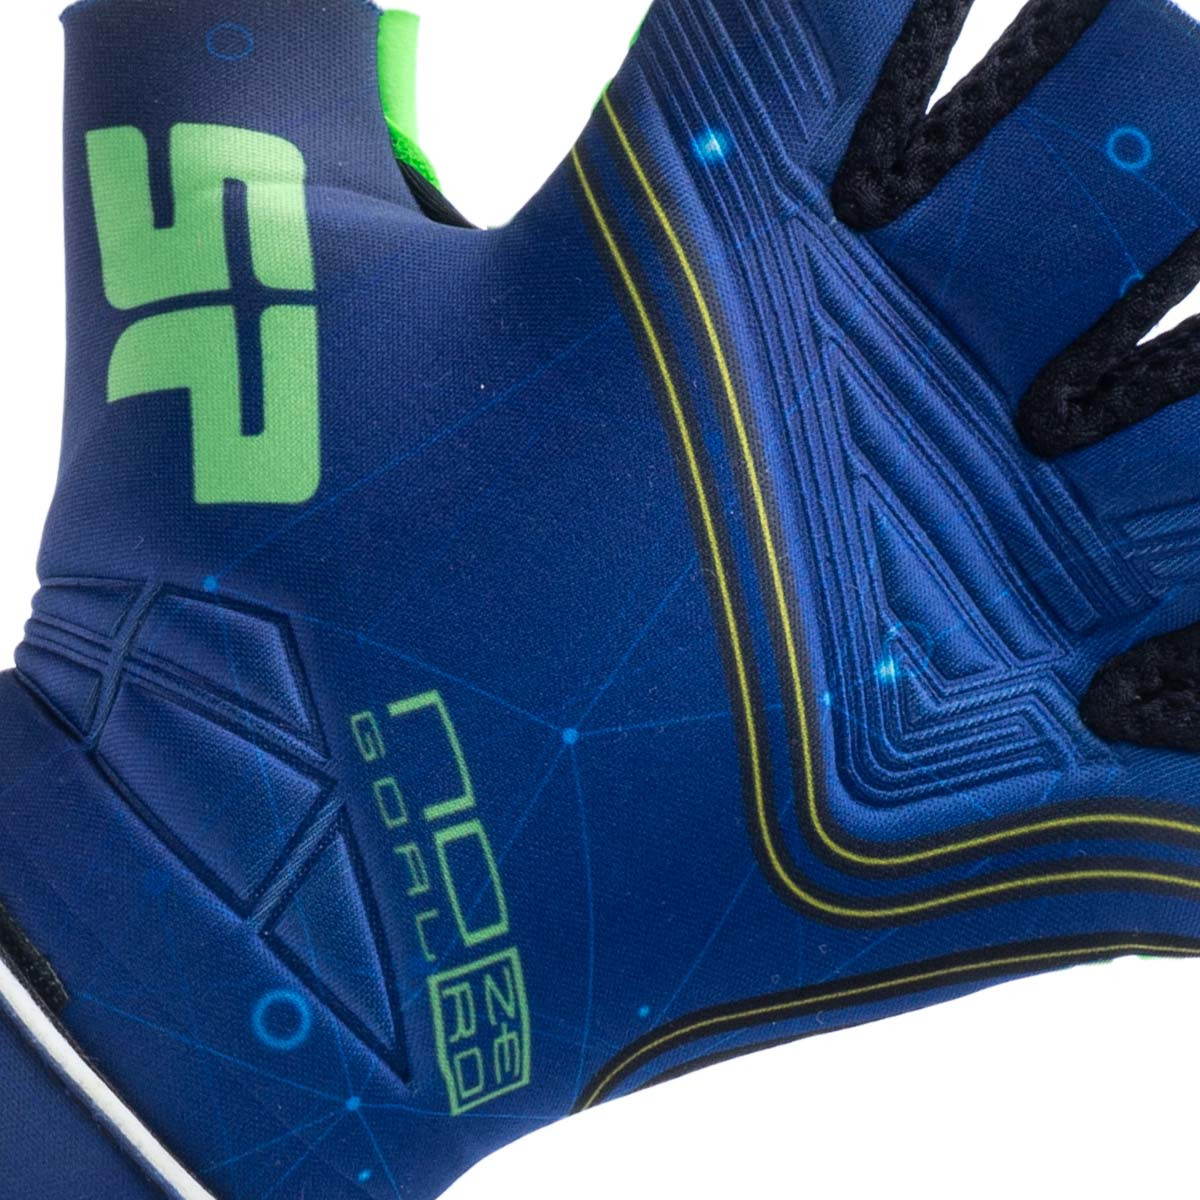 2021 Colombian Federation Summer Gloves in Blue by Suarez 